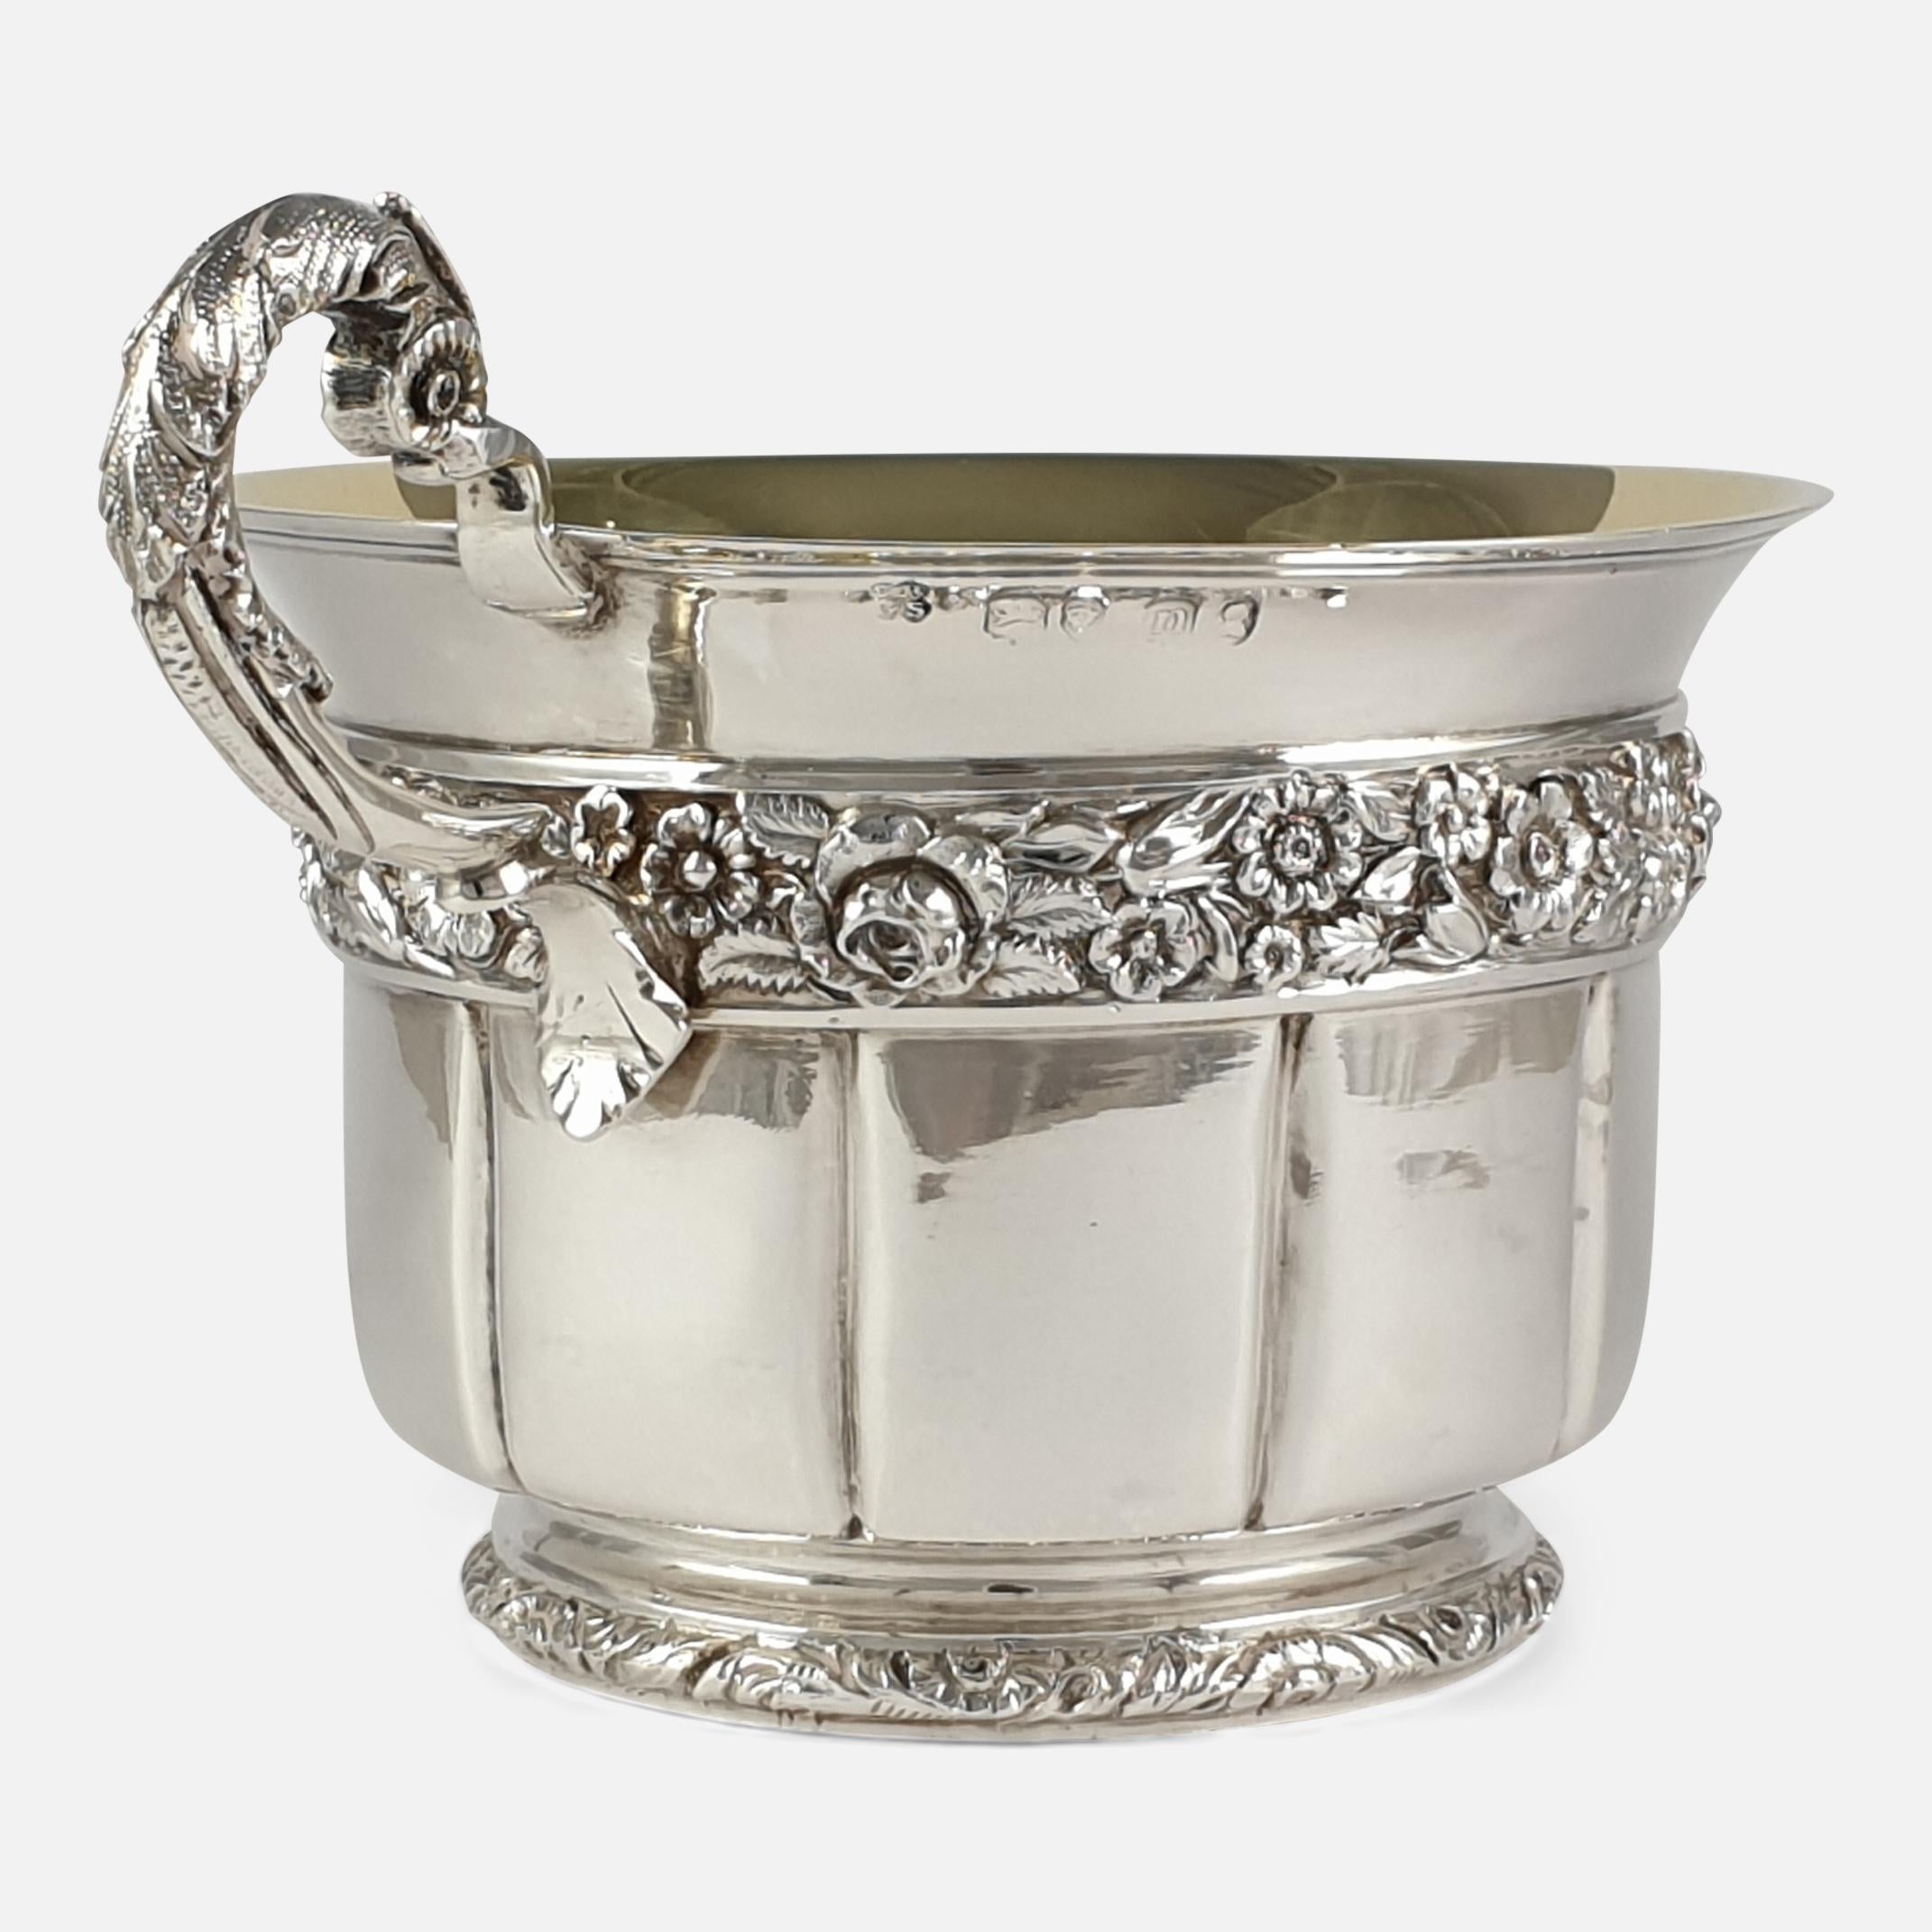 Early 19th Century George IV Sterling Silver Gilt Christening Cup, London, 1828